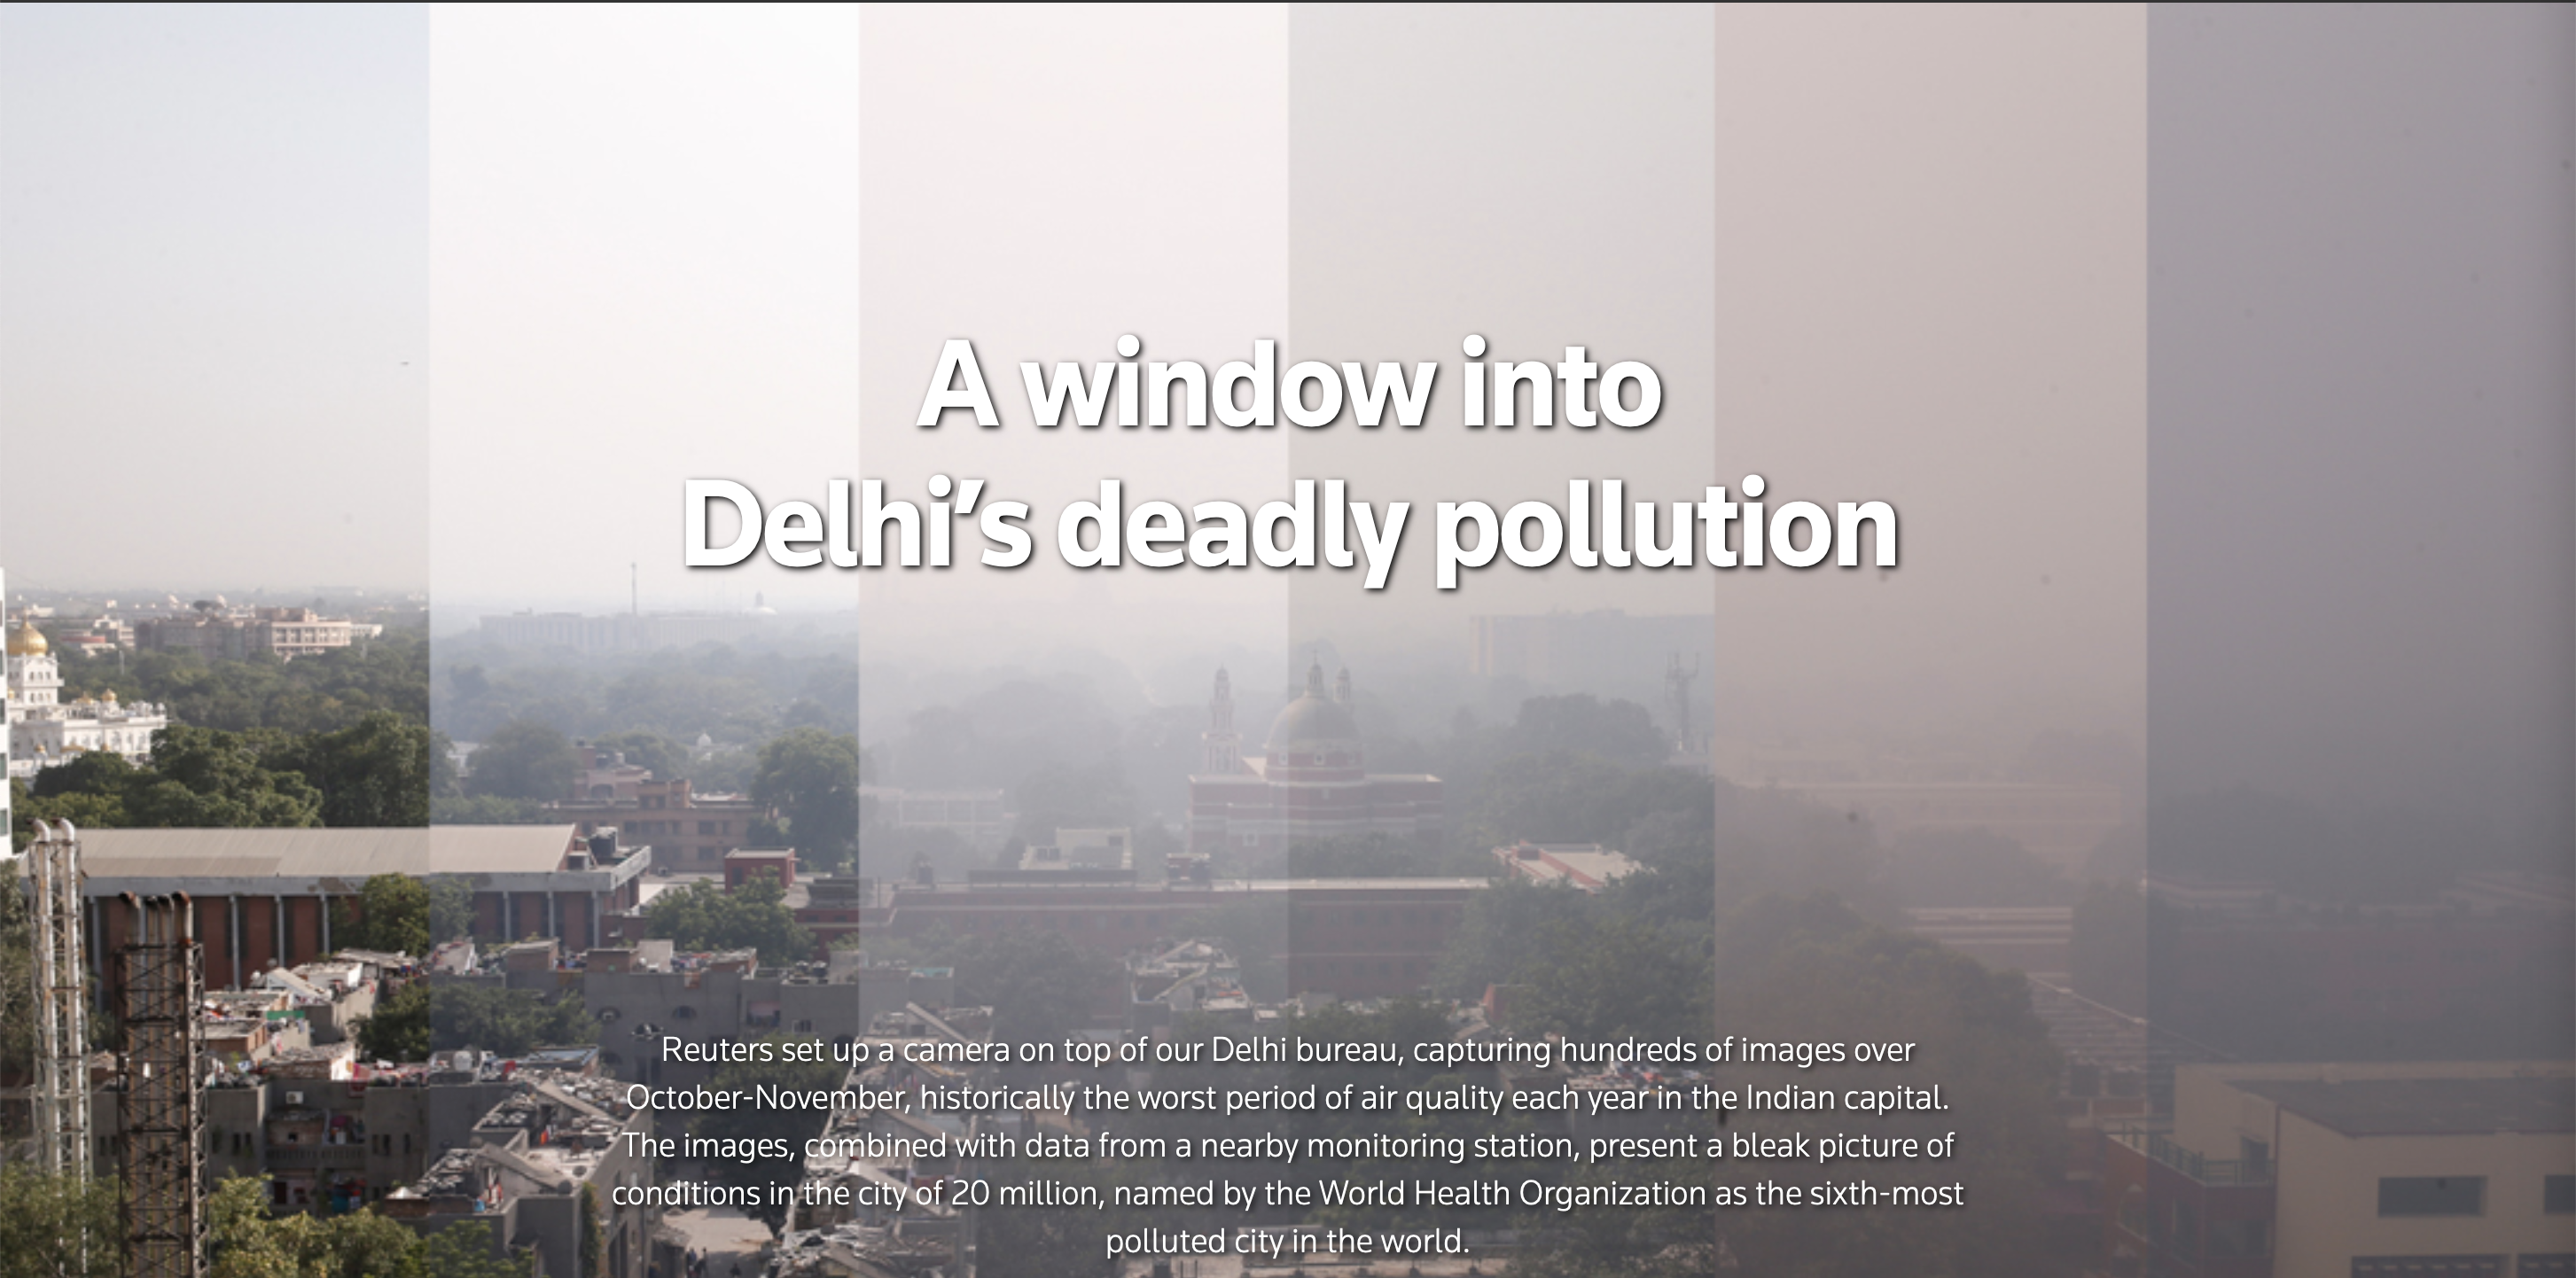 Screenshot of the opening of the article titled Delhi's deadly pollution, showing a composition of views on the city with increasing amount of smog from left to right